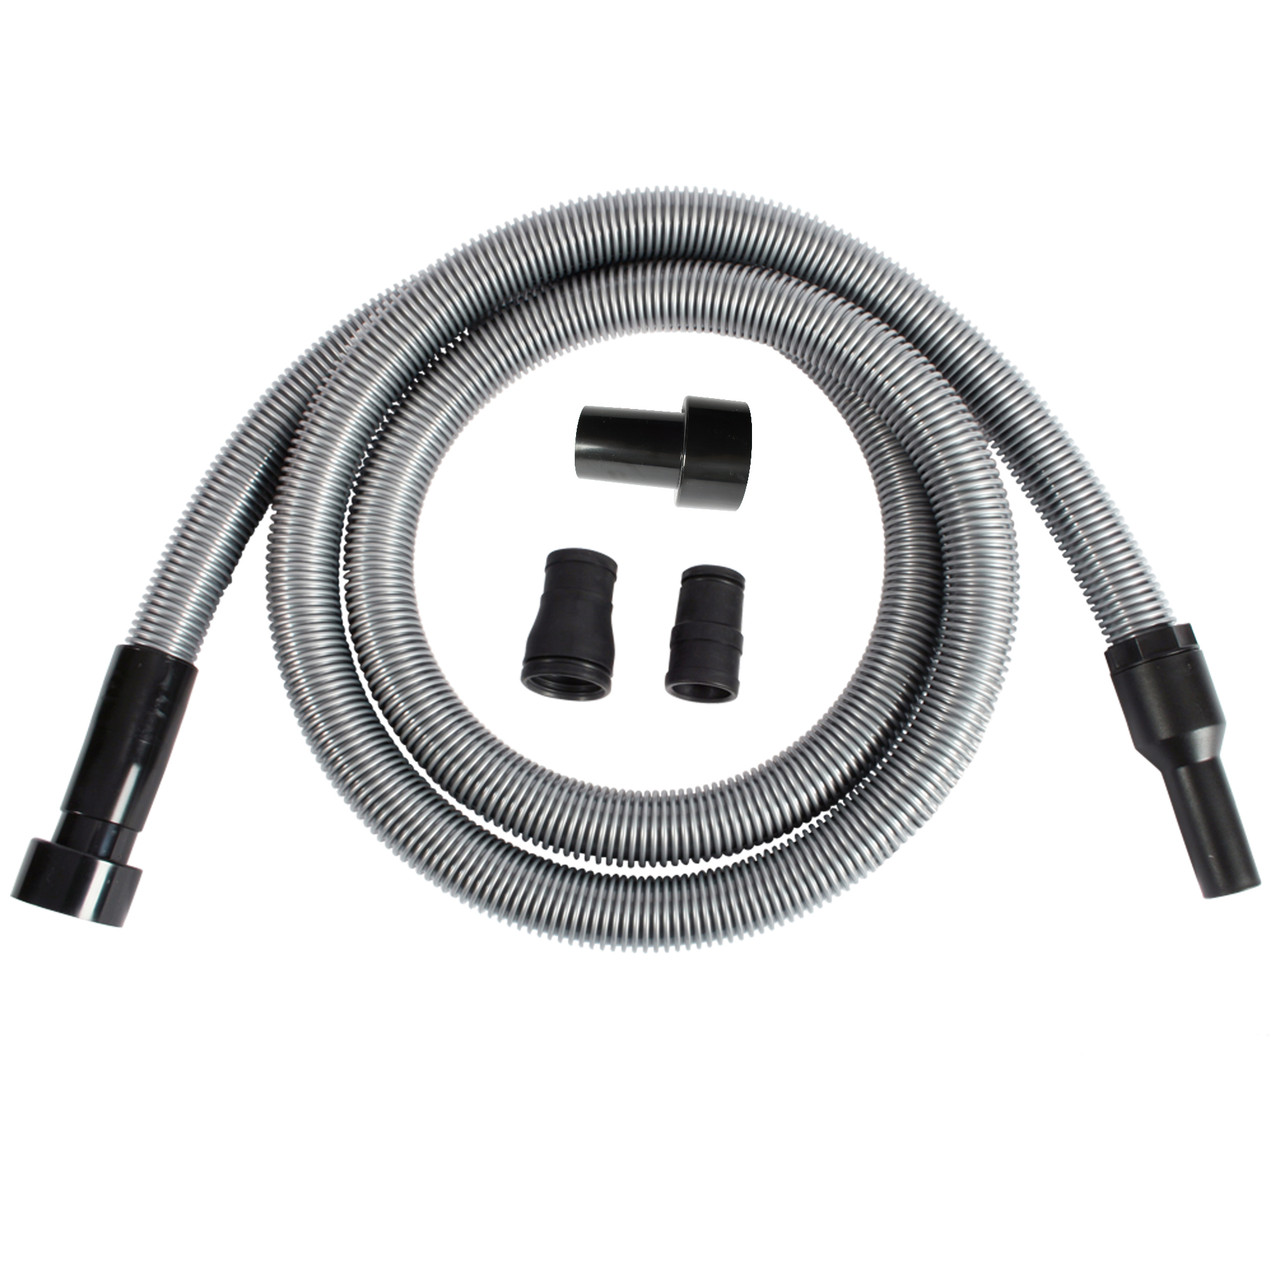 Cen-Tec Systems 94148 Premium 10 ft. Shop Vacuum Hose with Power Tool Adapter Set, Silver